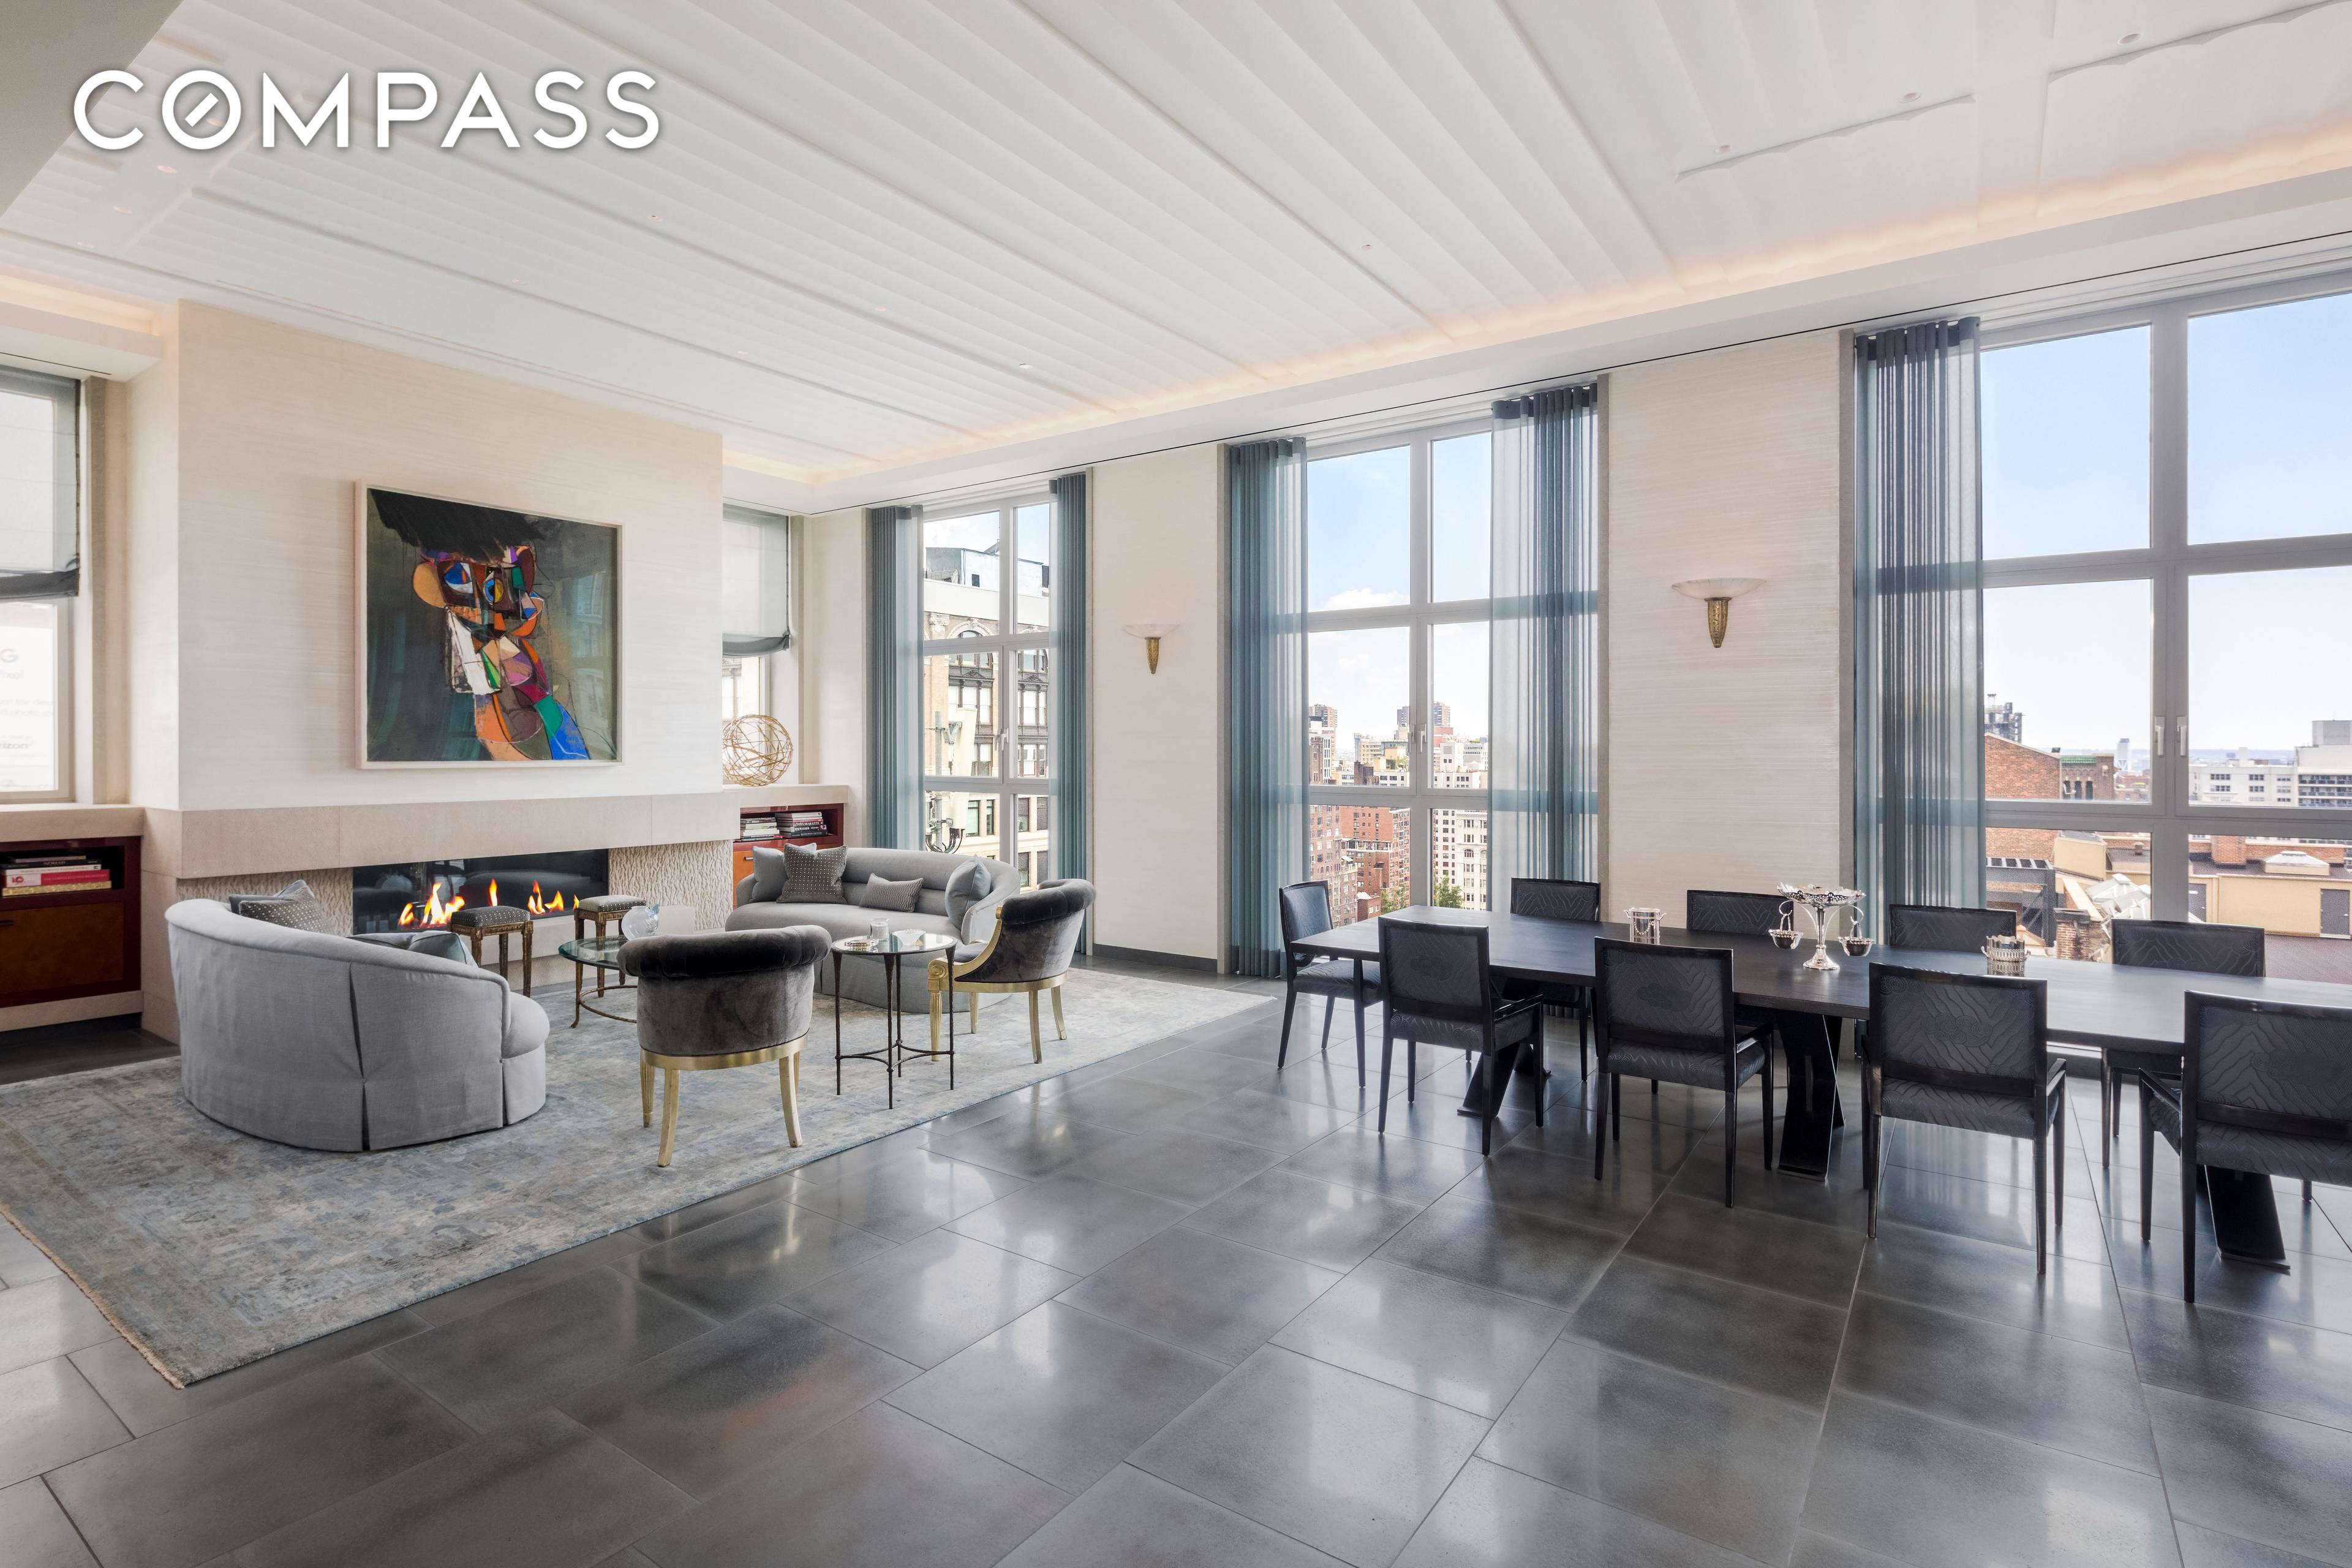 Penthouse 17 at 240 Park Avenue South is a glamorous and elegant home boasting striking views, unparalleled high end designer finishes and a perfect layout.